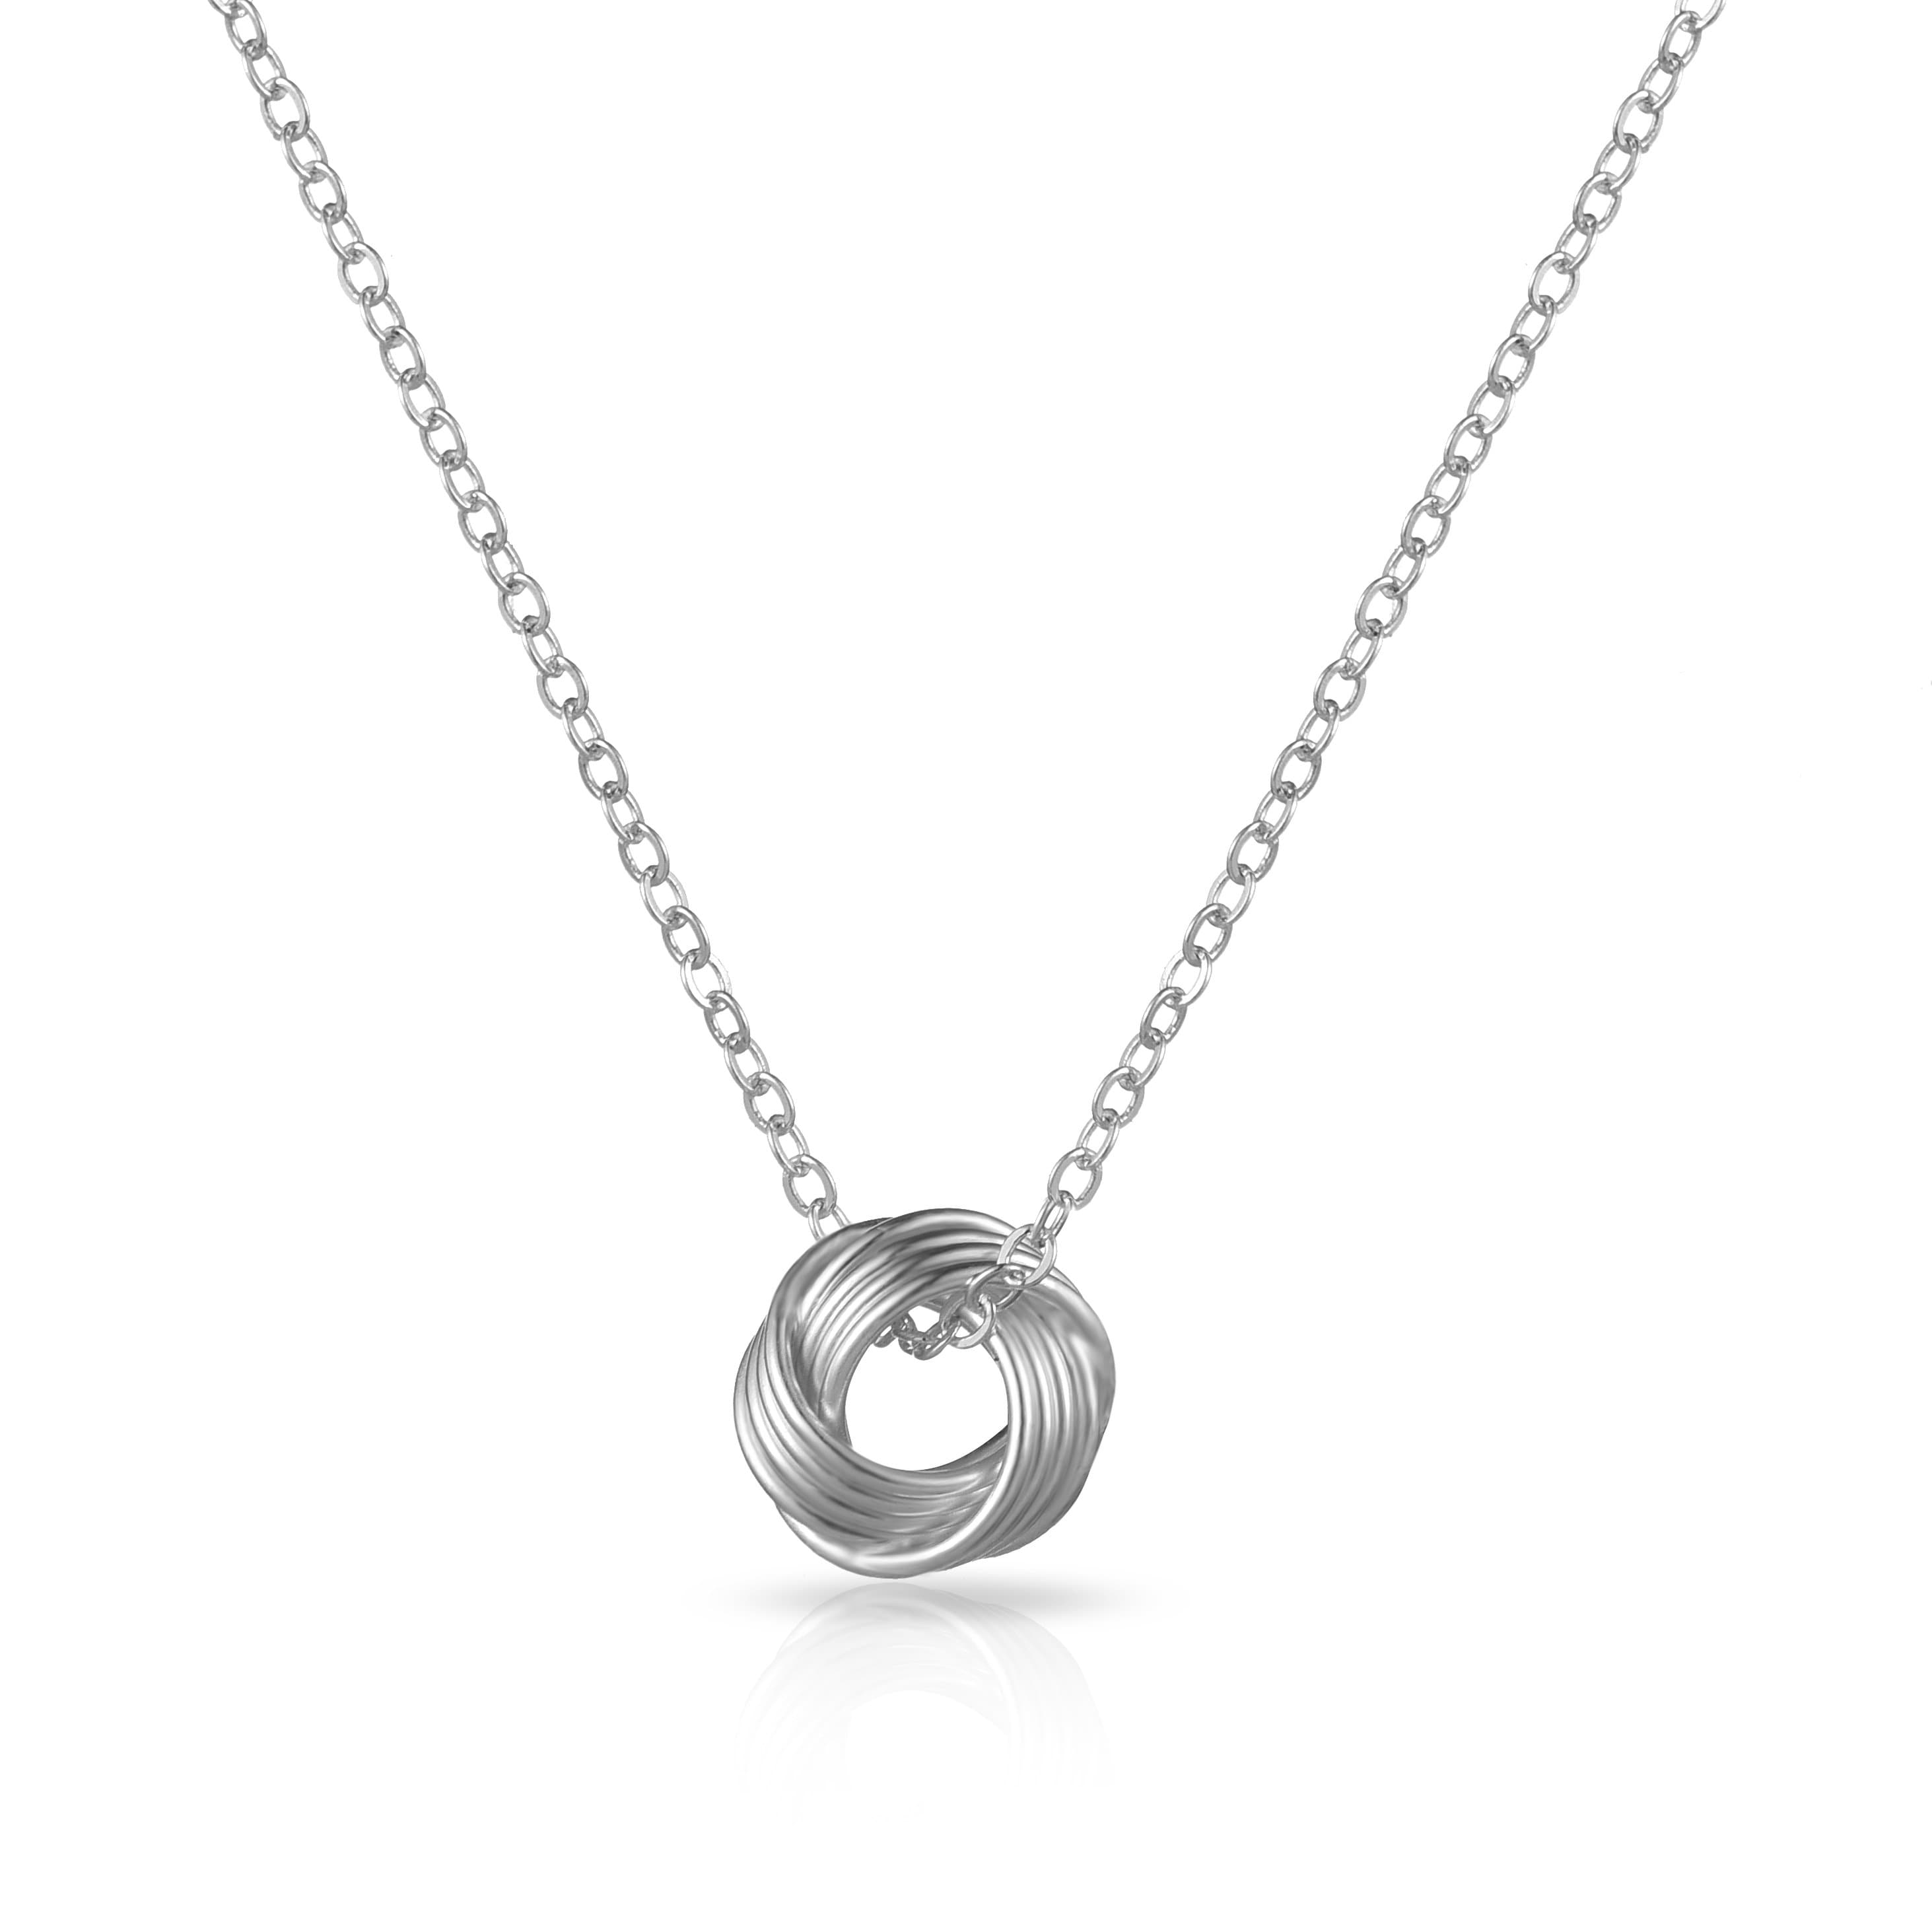 Buy Praavy 925 Sterling Silver Love Knot Necklace - P20N0004 (45) Online